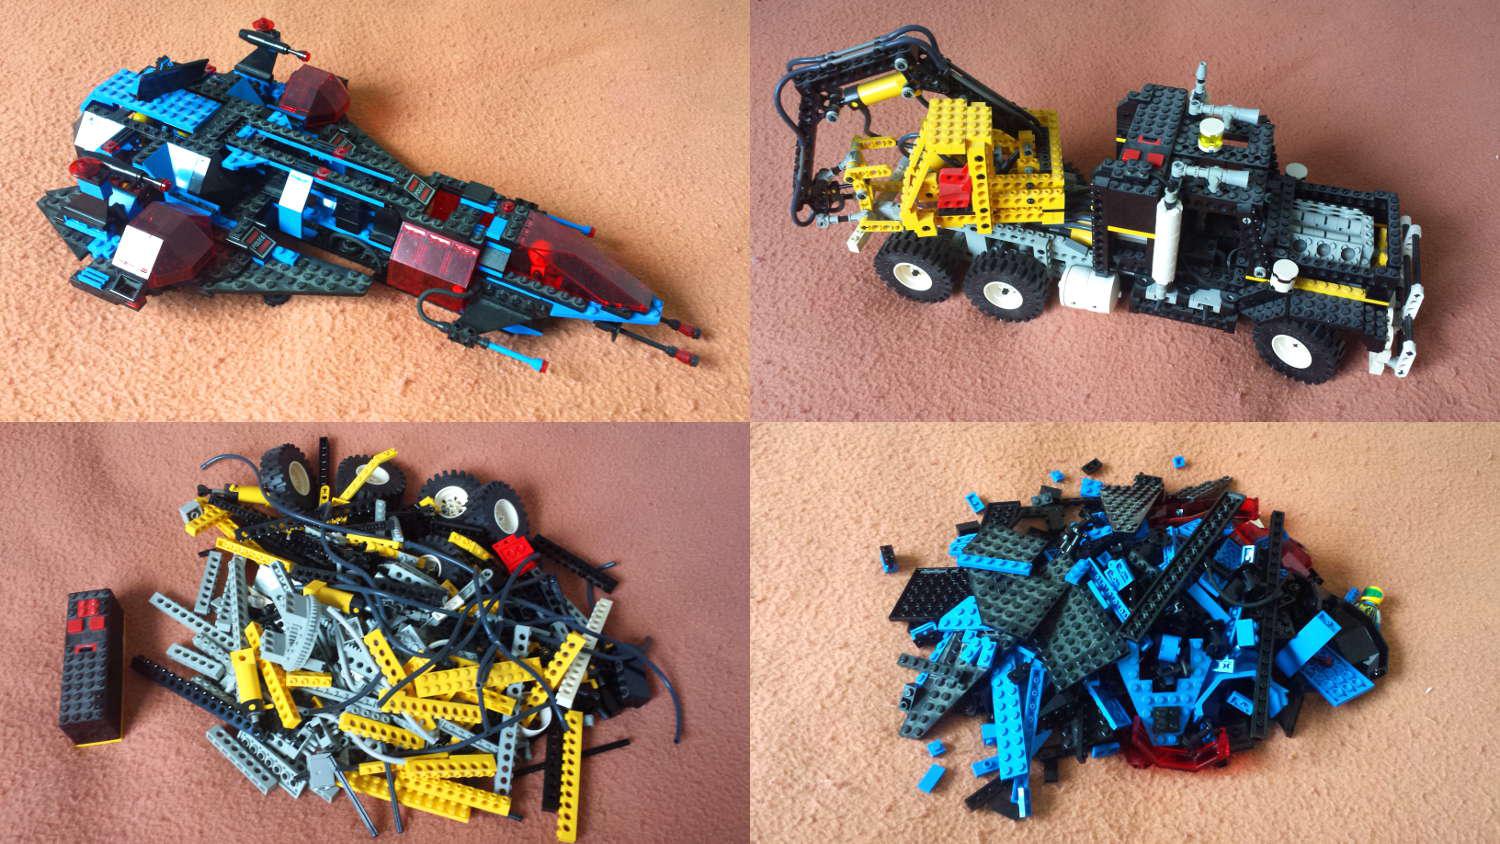 A collage of four photographs. The first row shows an assembled blue LEGO spaceship, and an assembled black and yellow crane truck. The bottom row shows piles of LEGO pieces for the same sets after being disassembled.